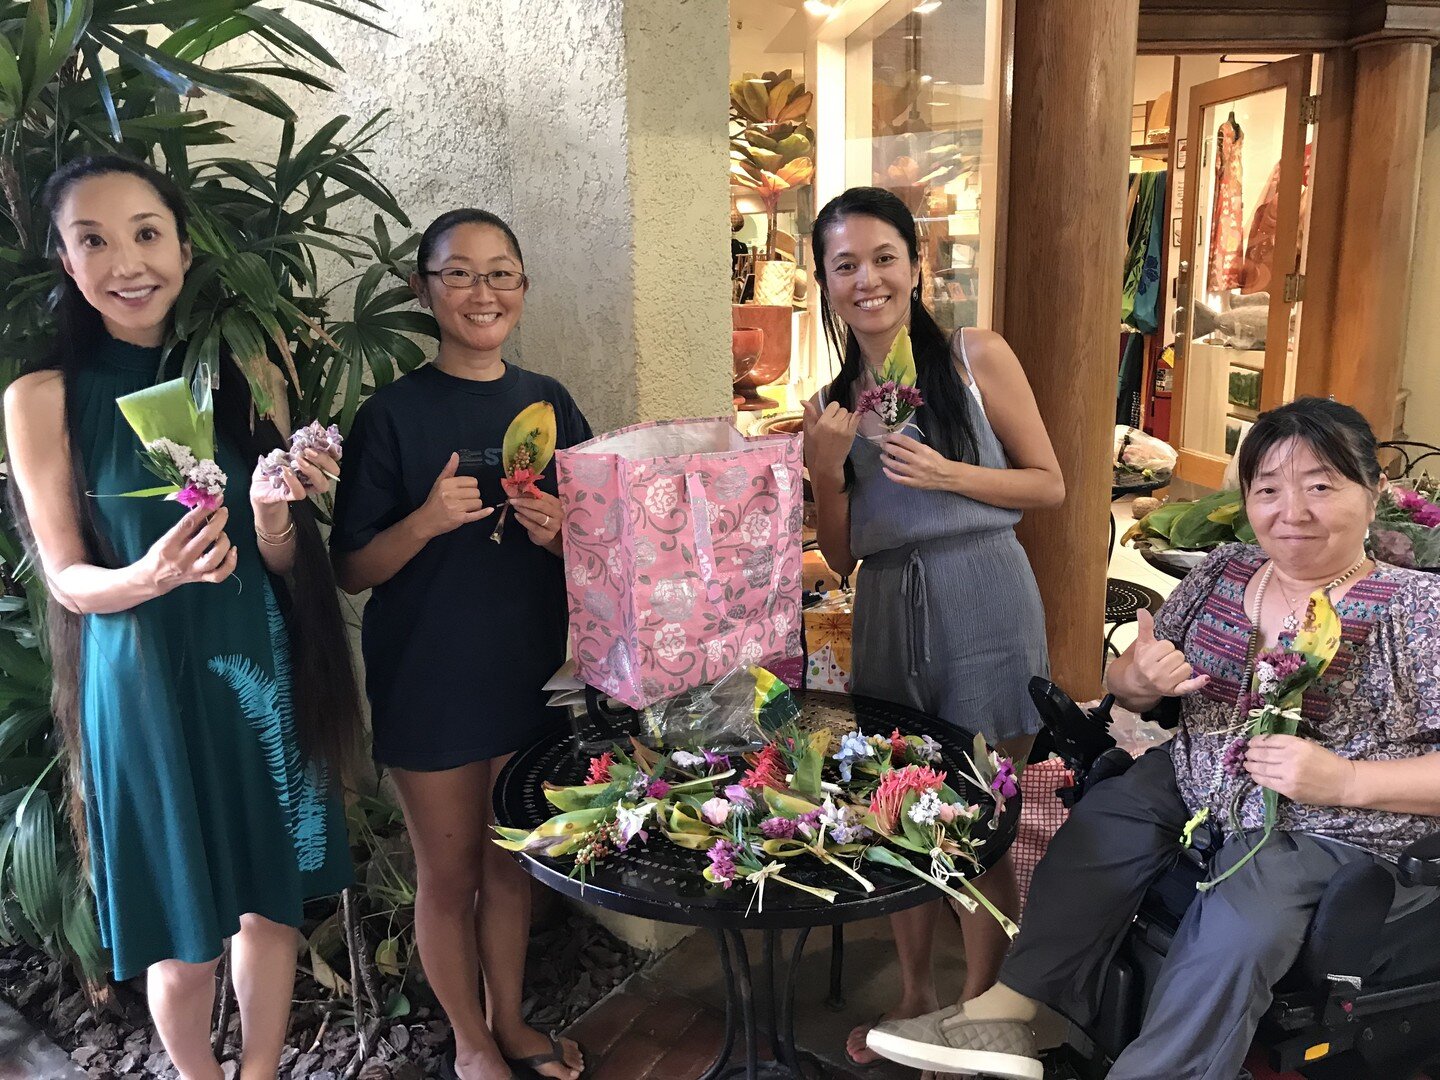 Every year, the Lei/Pua Culture ladies make flower leis and posies for Memorial Day to memorialize those that have passed at the National Memorial Cemetery of the Pacific. Join us on May 27th to make some special bouquets. Aunty Syl will provide the 